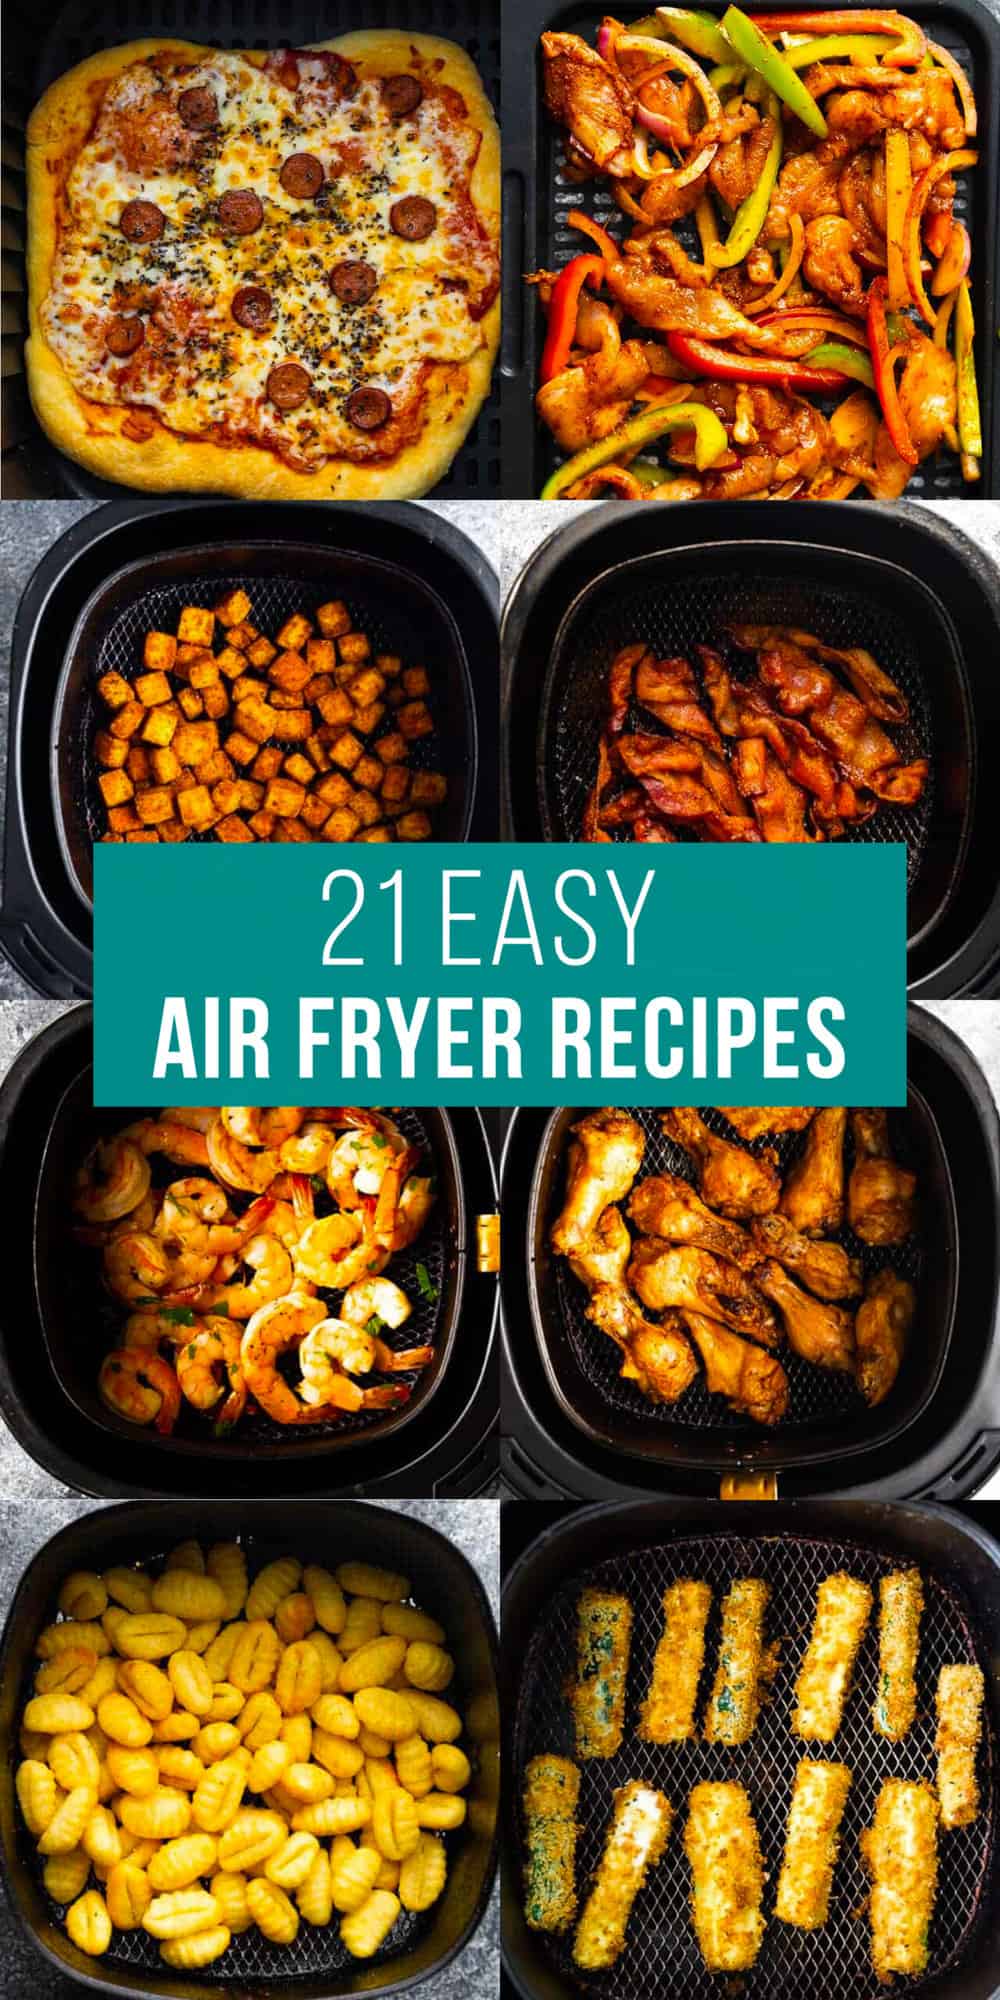 composite image with text: 21 easy air fryer recipes